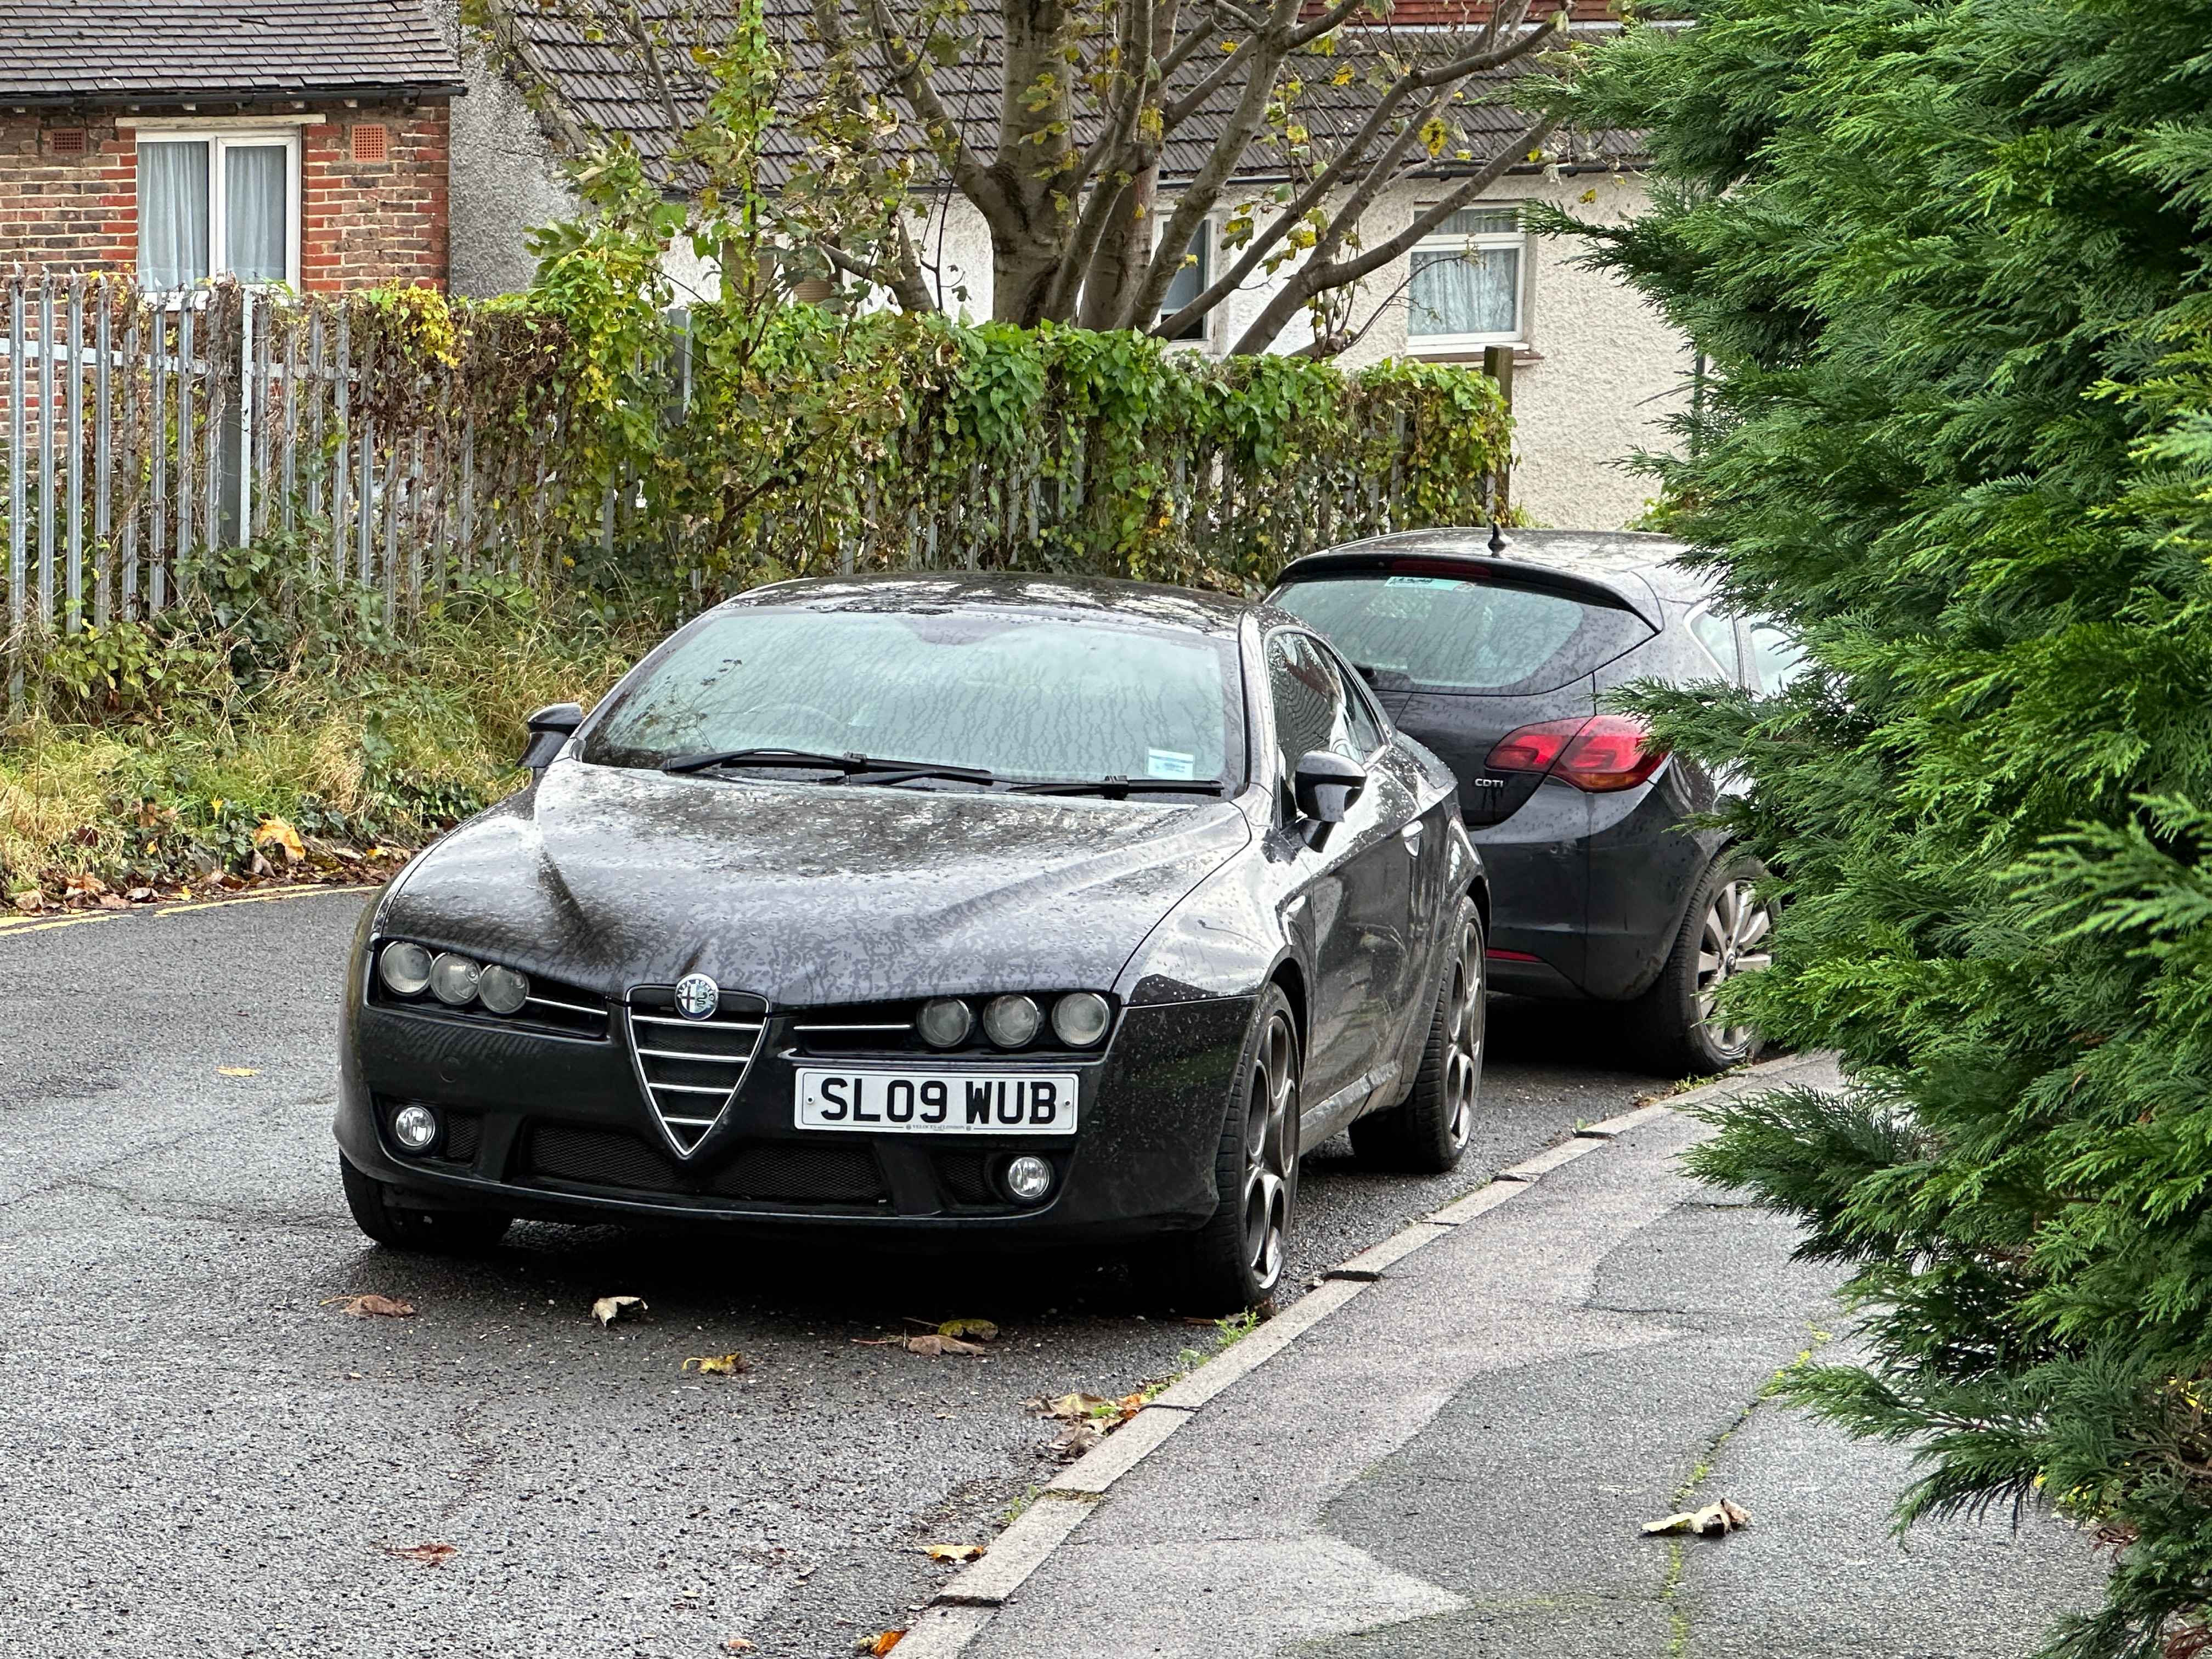 Photograph of SL09 WUB - a Black Alfa Romeo Brera parked in Hollingdean by a non-resident. The tenth of twenty photographs supplied by the residents of Hollingdean.